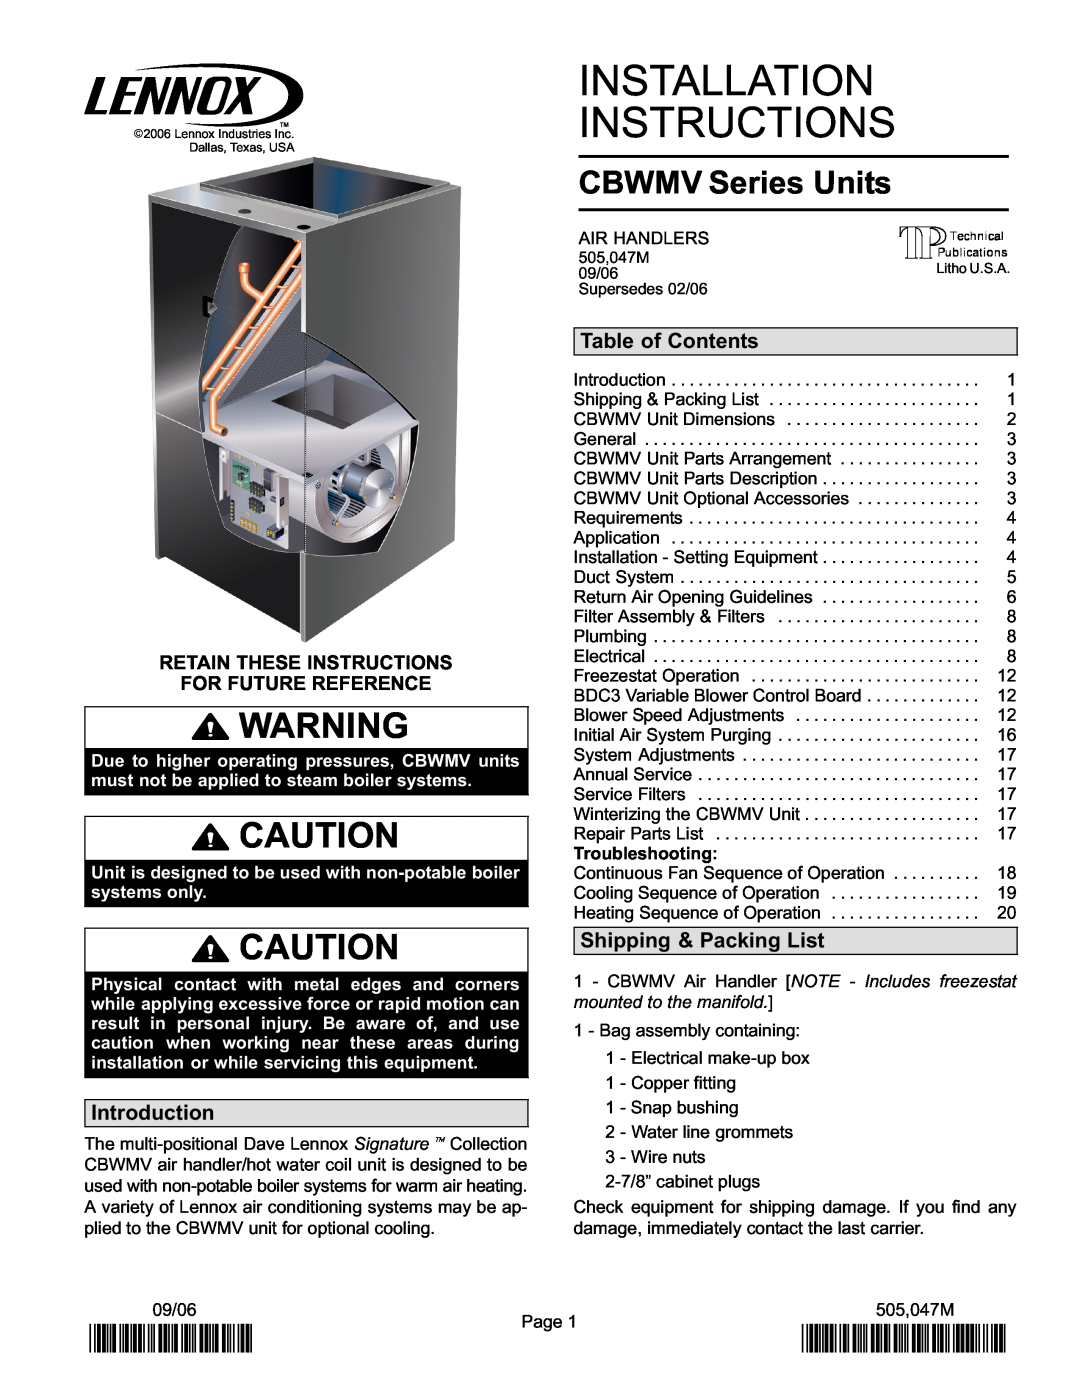 Lennox International Inc CBWMV installation instructions Table of Contents, Shipping & Packing List, Introduction, 2P0906 